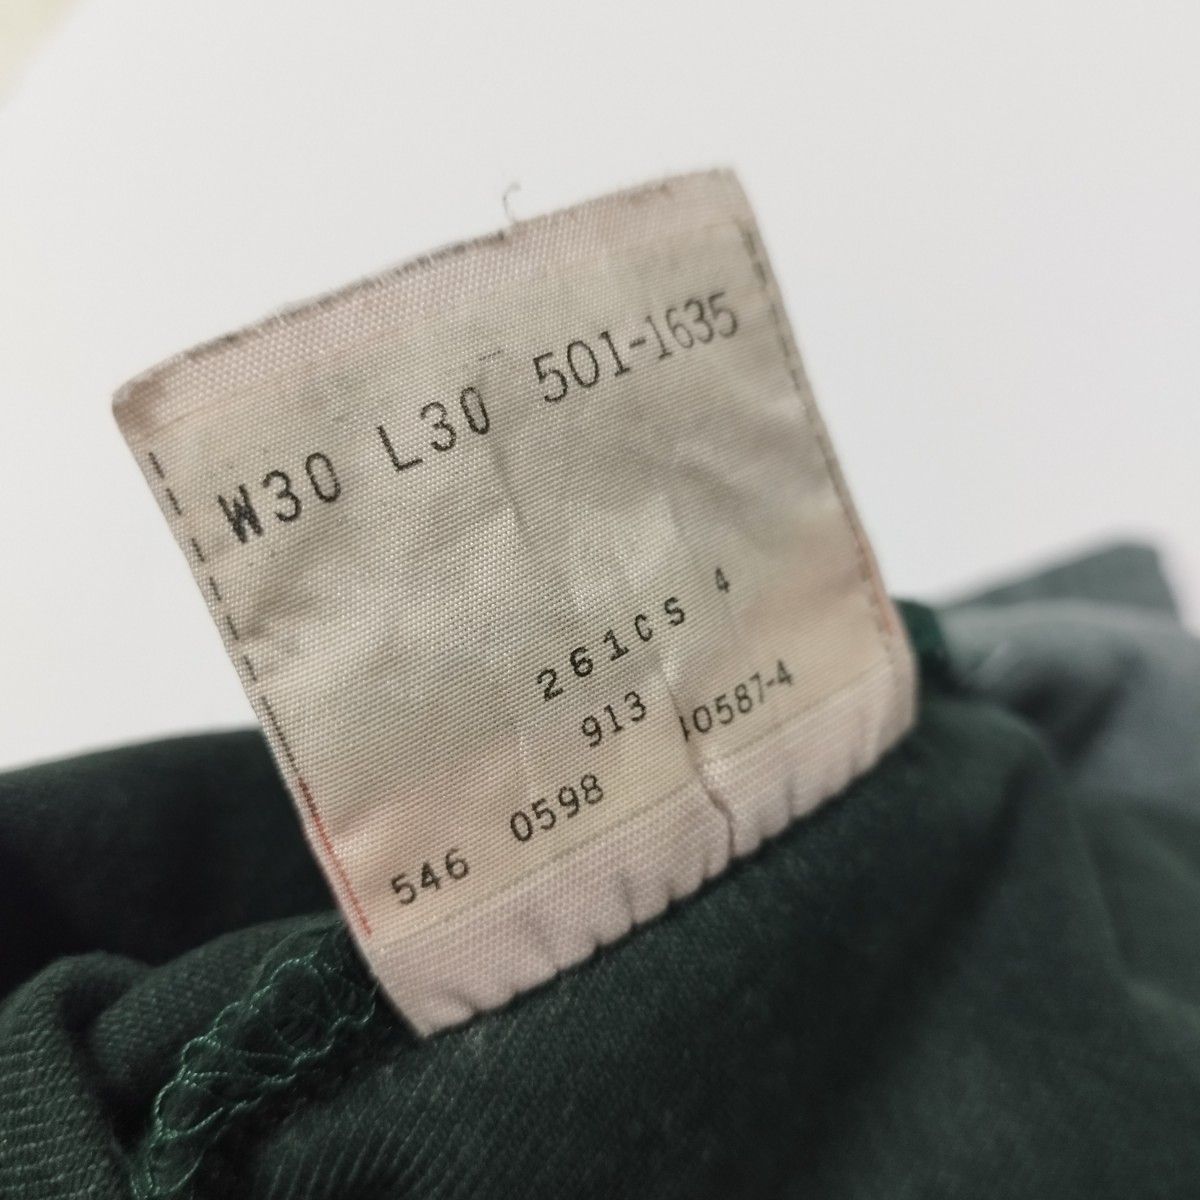 90s 90年代 アメリカ製 made in USA製 後染め リーバイス LEVI’S 501 黒 緑 w30